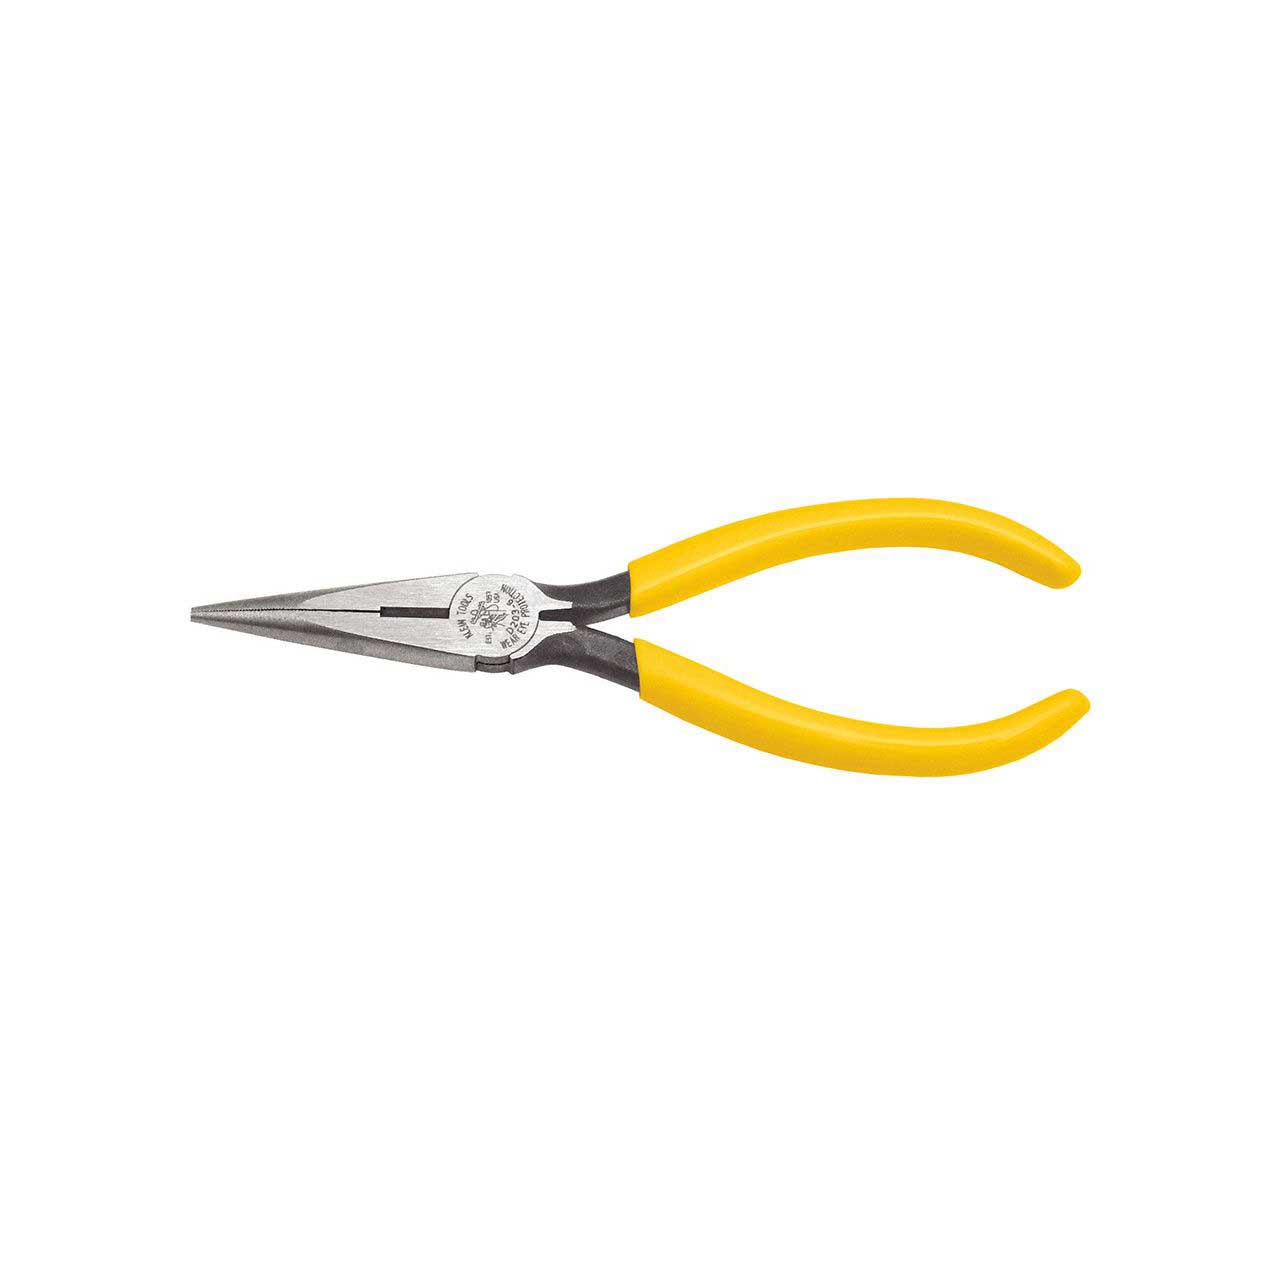 Klein D203-6 6-Inch Pliers with Needle Nose Side-Cutters